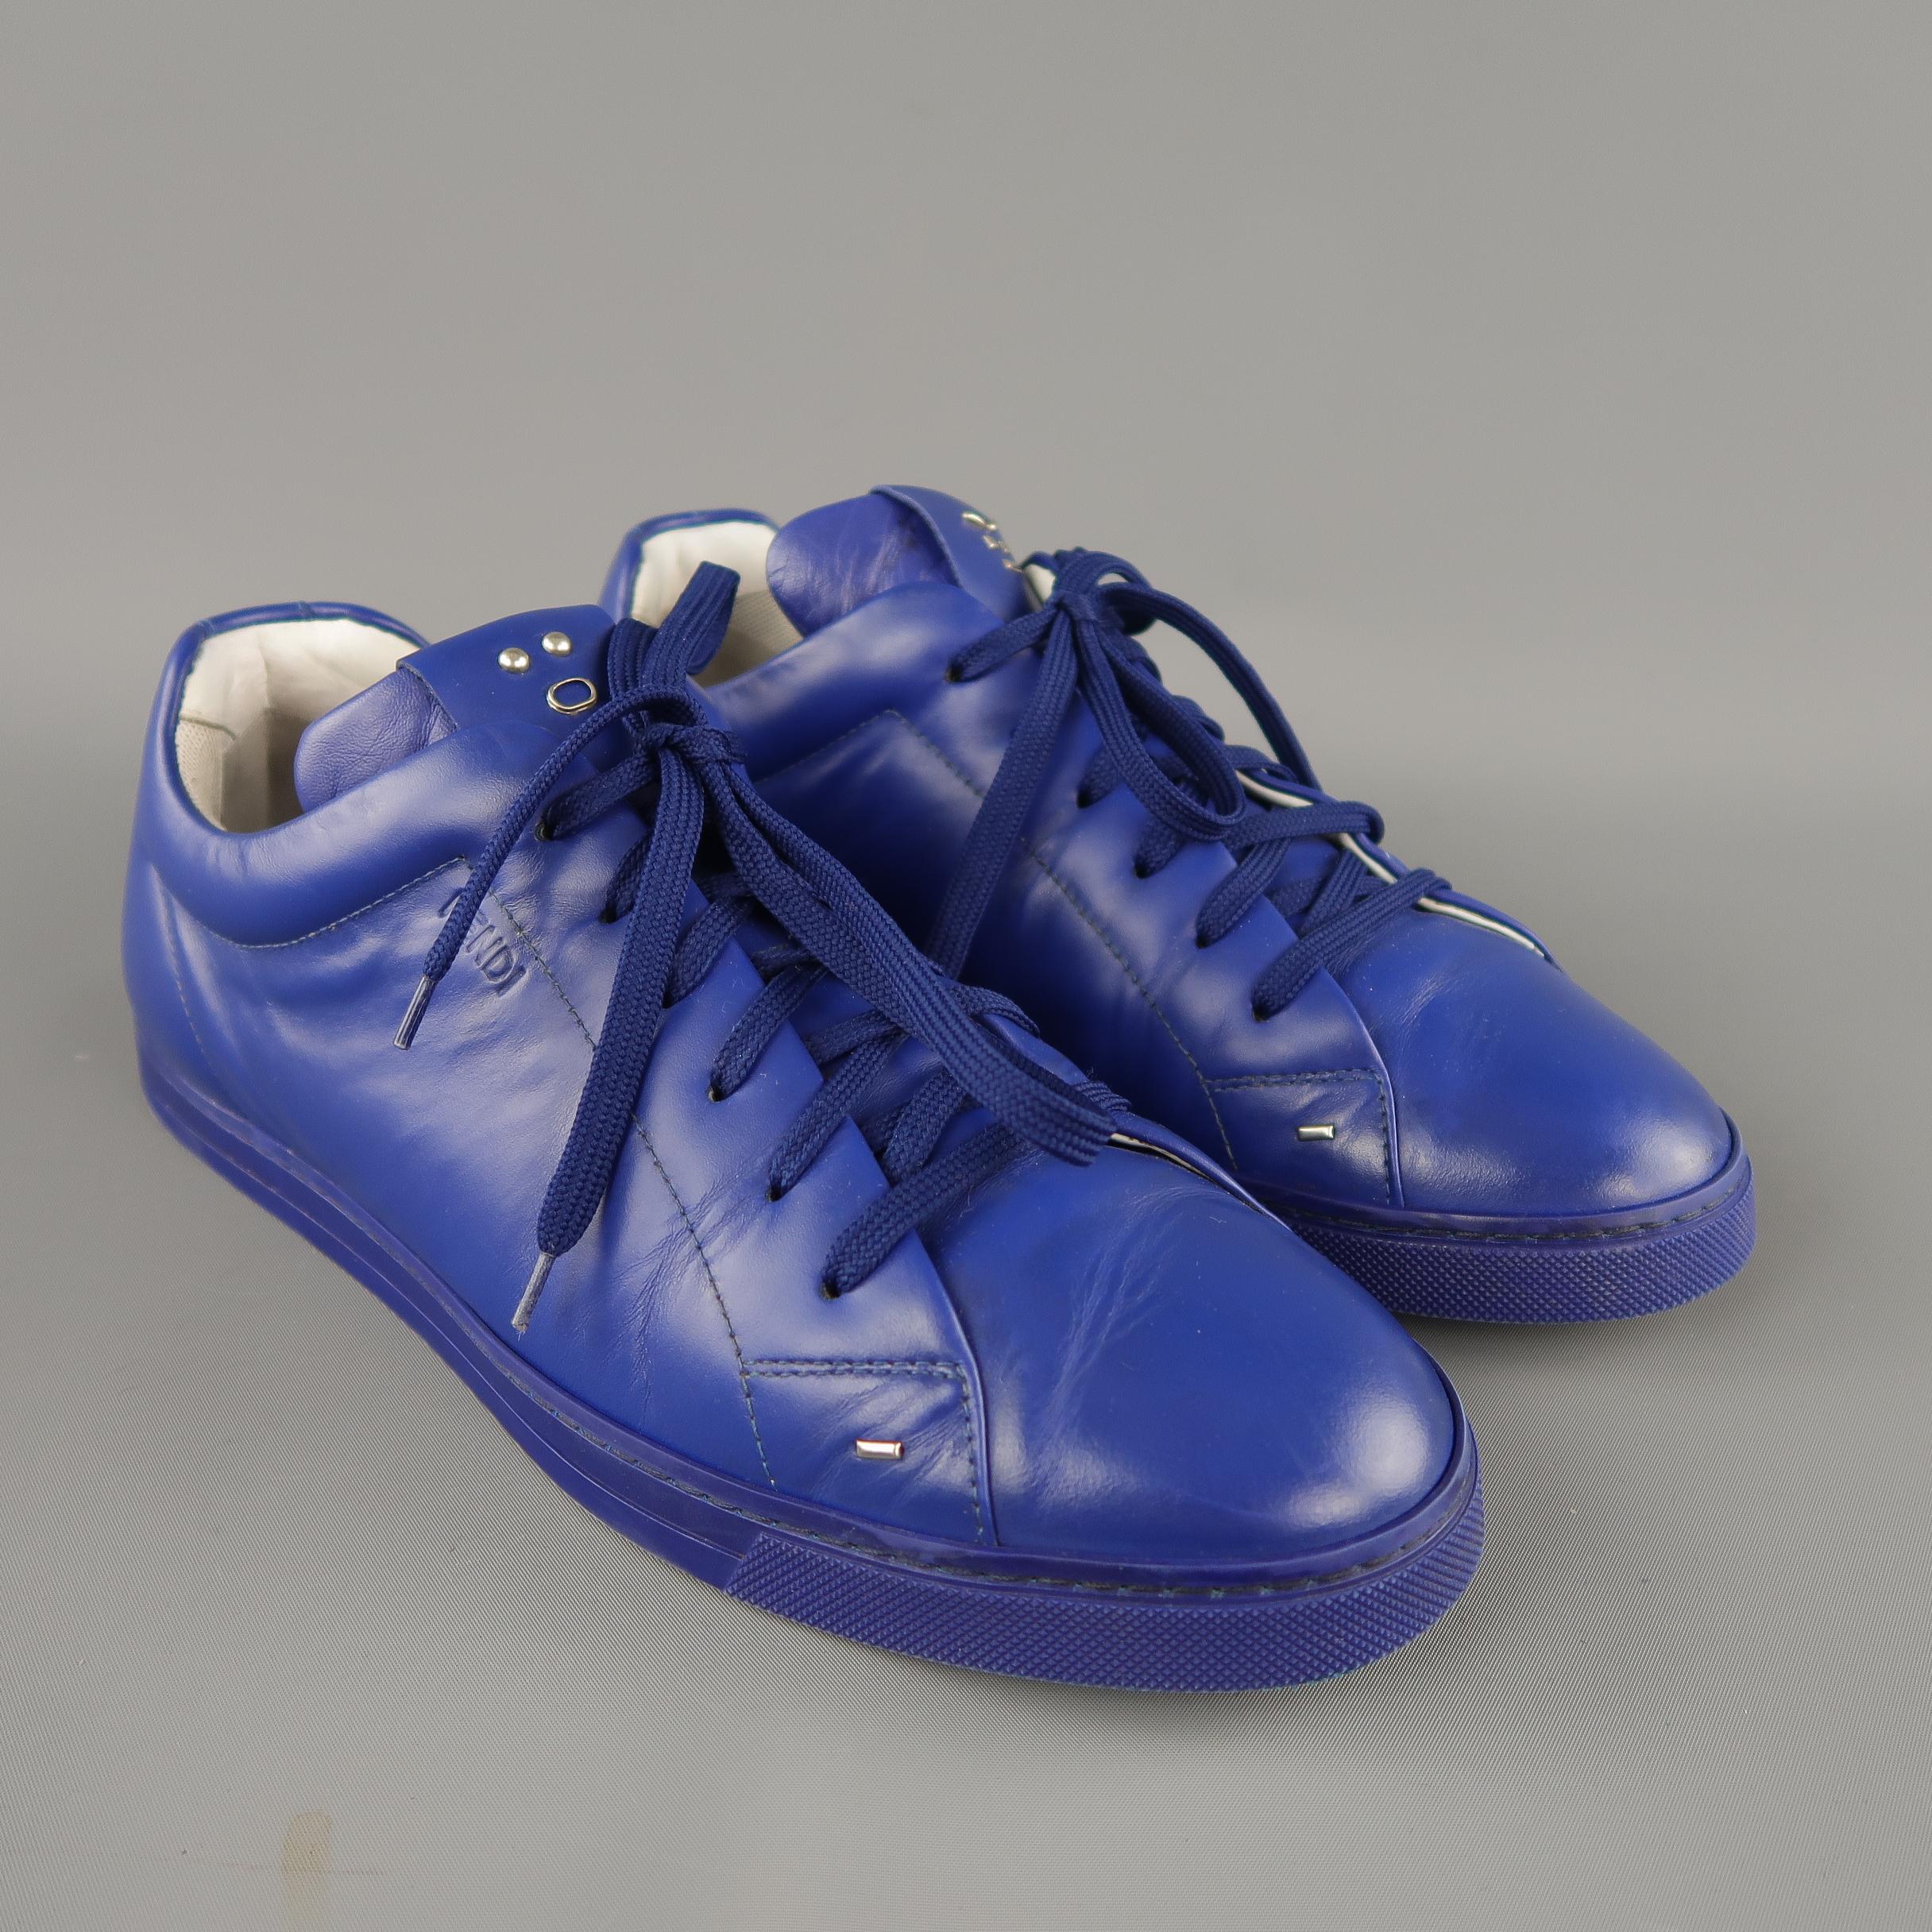 FENDI low top sneakers come in royal blue leather with silver tone metal face detailed tongues. Made in Italy.
 
Good Pre-Owned Condition.
Marked: UK 9
 
Outsole: 12 x 4 in.